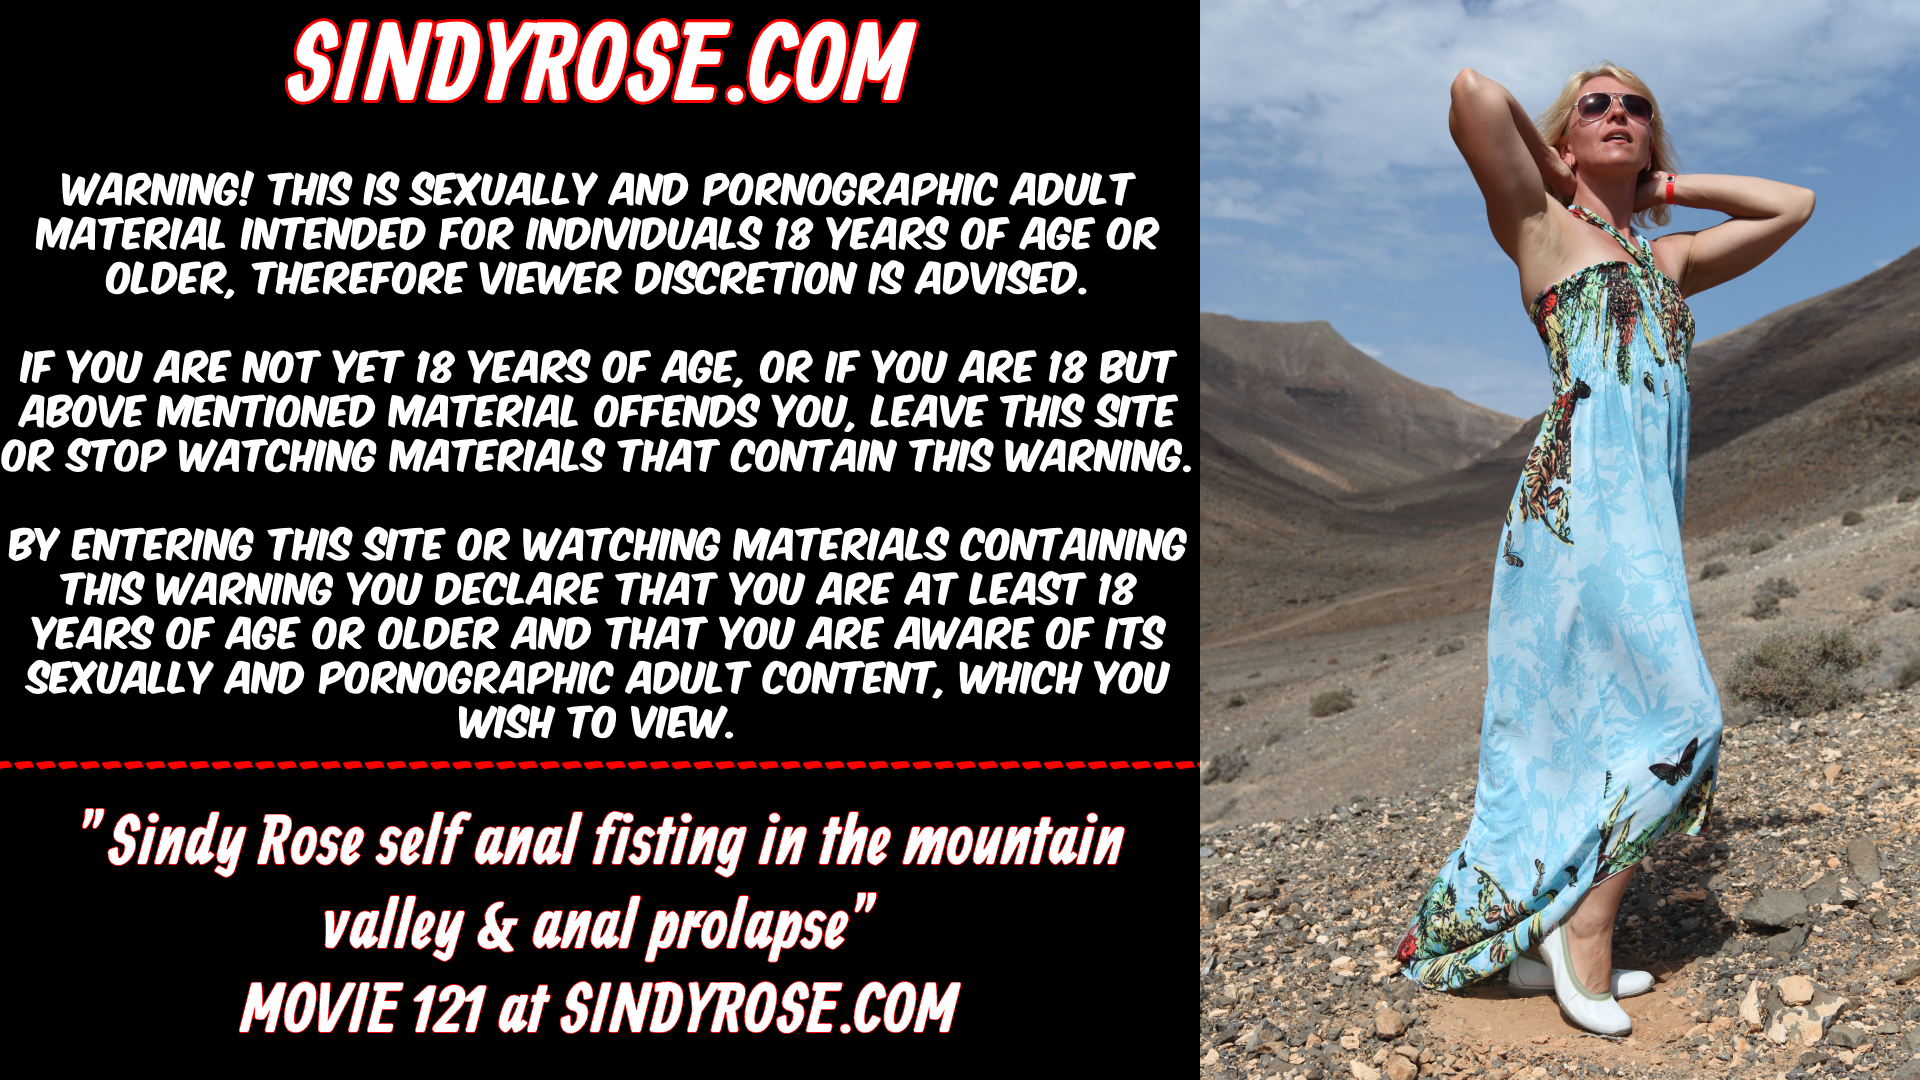 Sindy Rose self anal fisting in the mountain valley